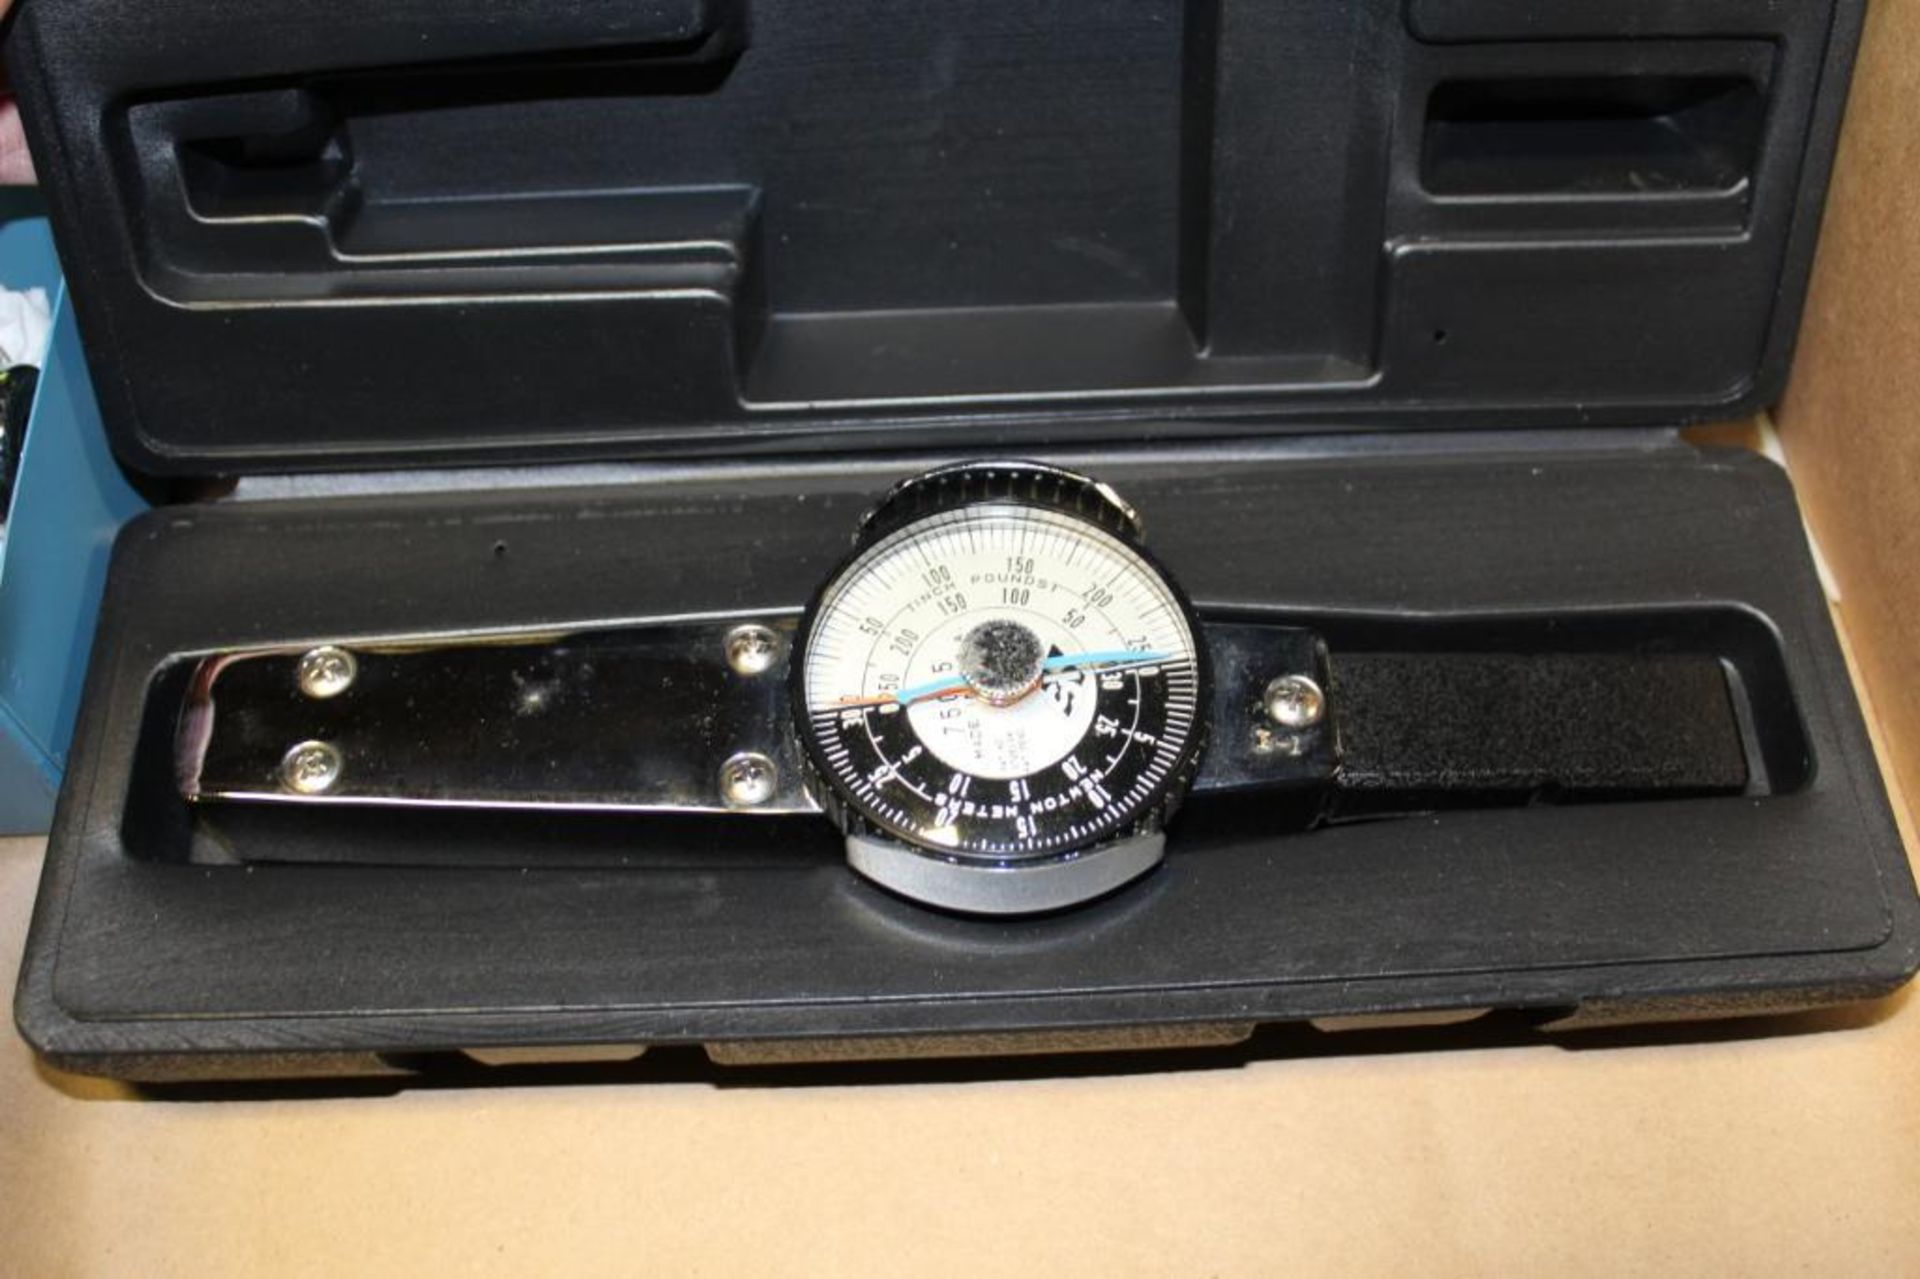 Dial Torque Wrench Model 75025